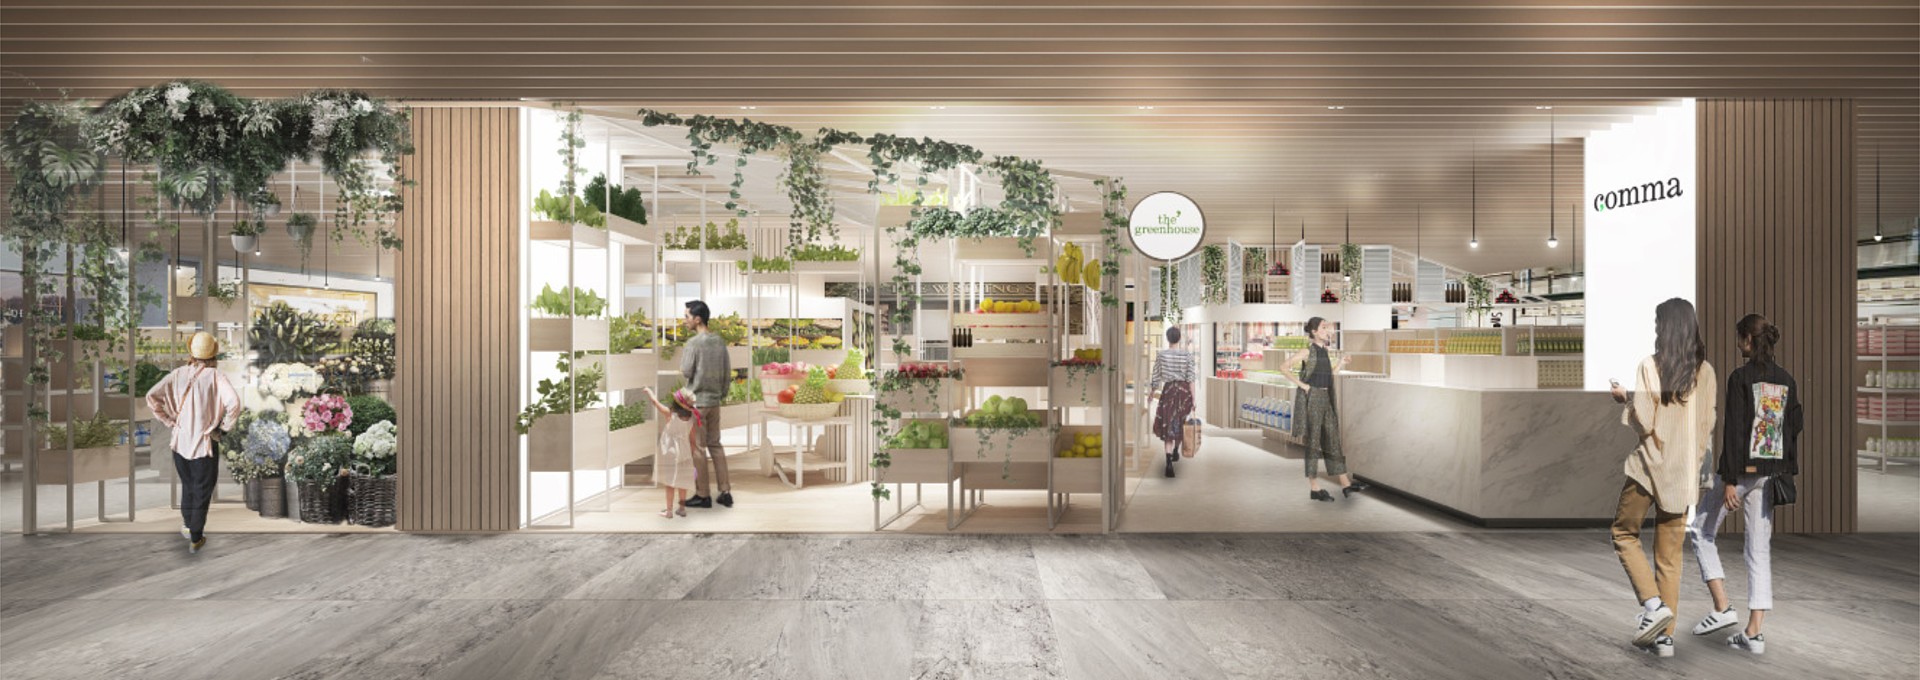 Studio Königshausen has crafted a retail design for Comma Supermarkets, a visionary new chain set to revolutionize the future of Chinese supermarkets. Located in Guangzhou, the store seamlessly blends technology and physical space to optimise efficiency, ultimately saving customers valuable time during their grocery shopping. 